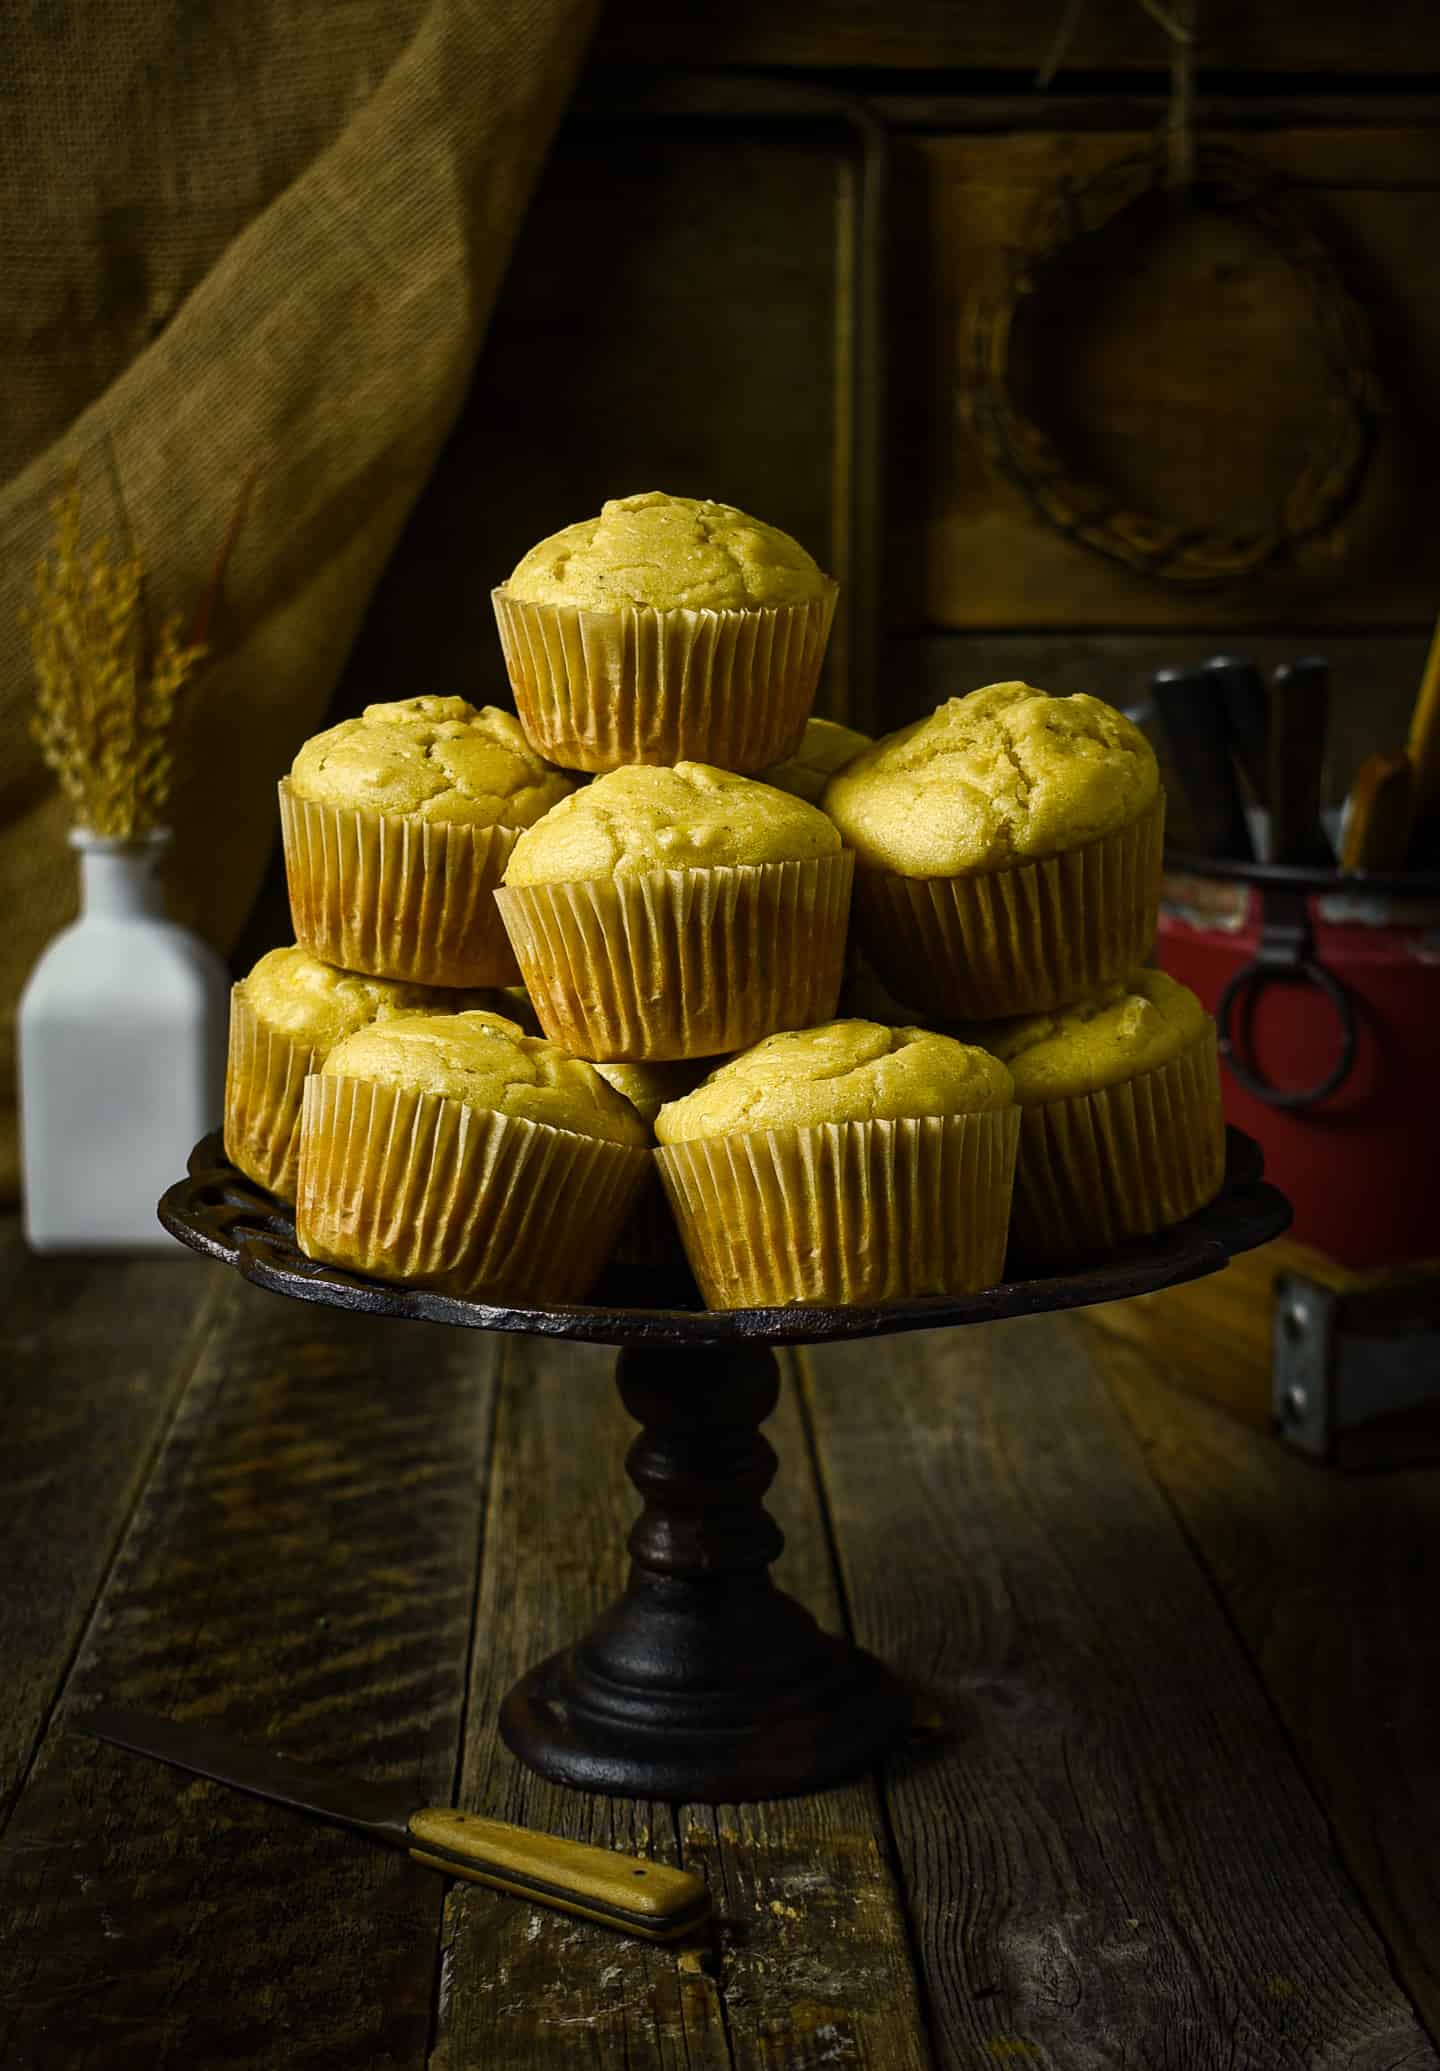 Muffins stacked on top of a cake stand.